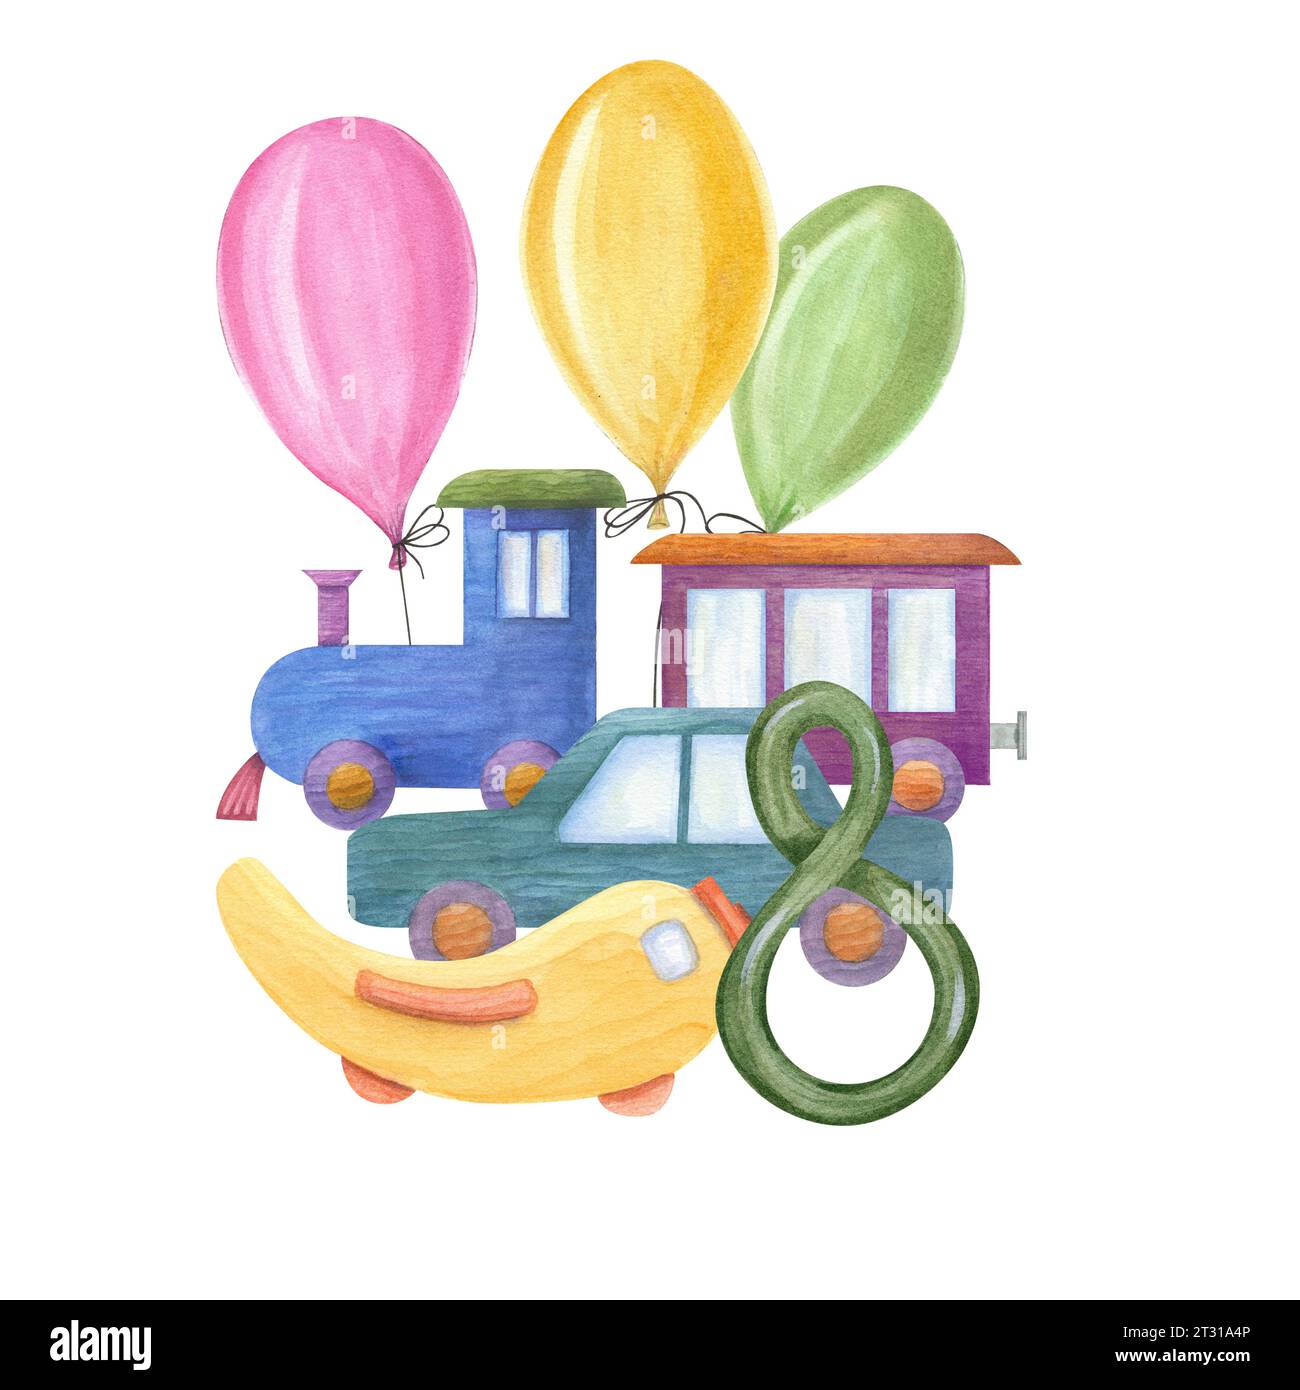 Steam locomotive with carriage, car, airplane, multicolored balloons, number 8. Kid wooden Toys. Watercolor illustration. Stock Photo